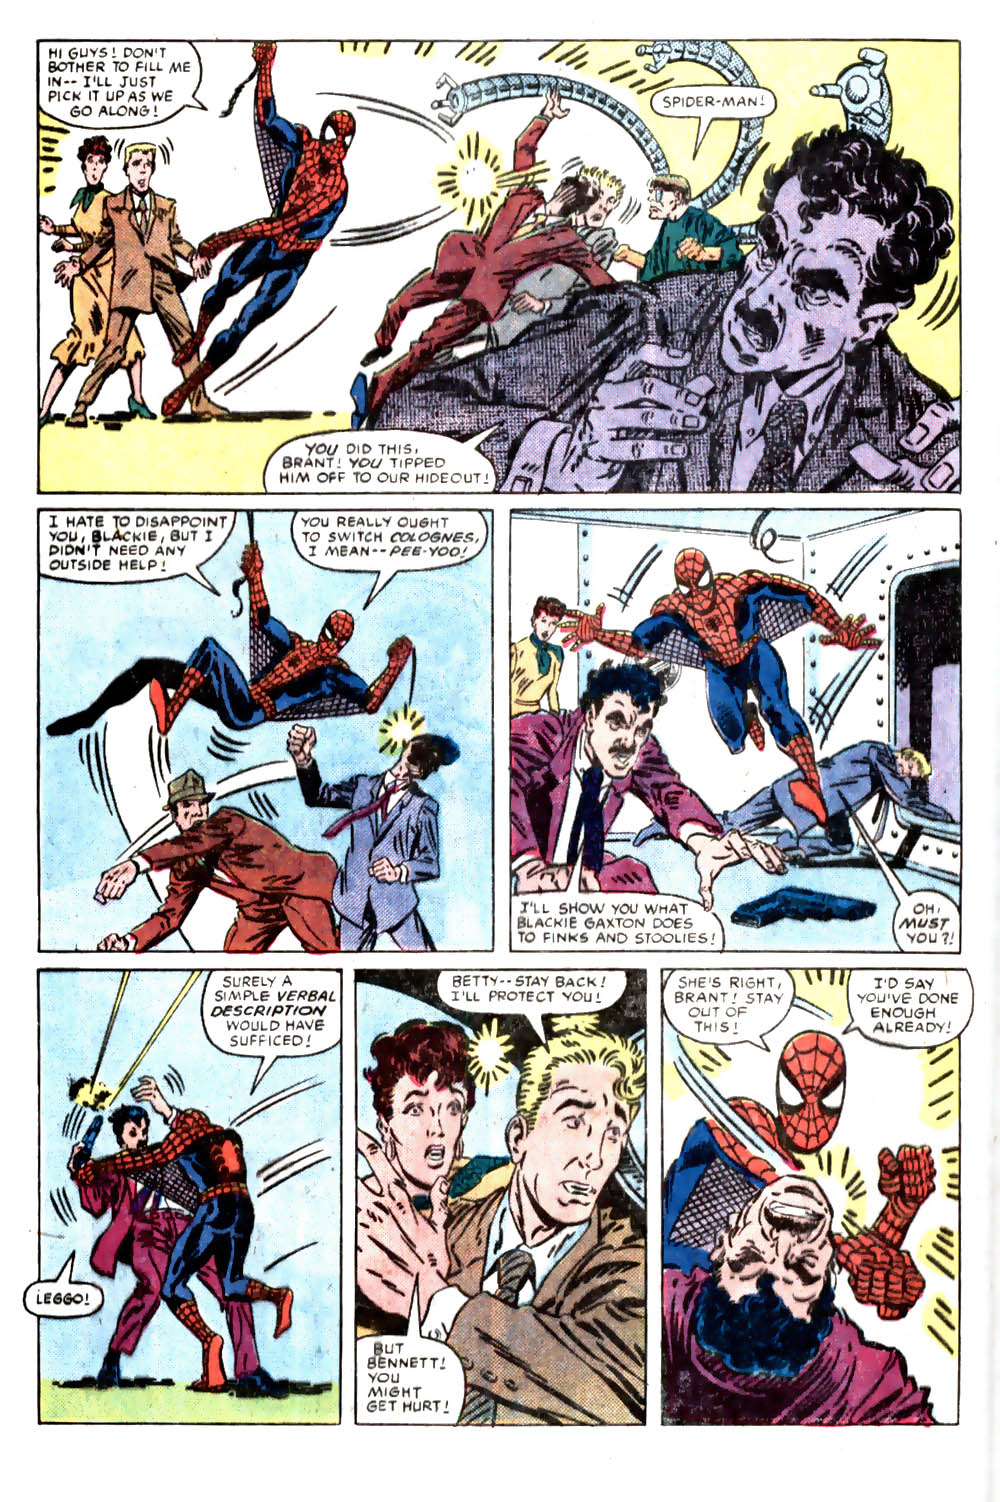 What If? (1977) issue 46 - Spiderman's uncle ben had lived - Page 27